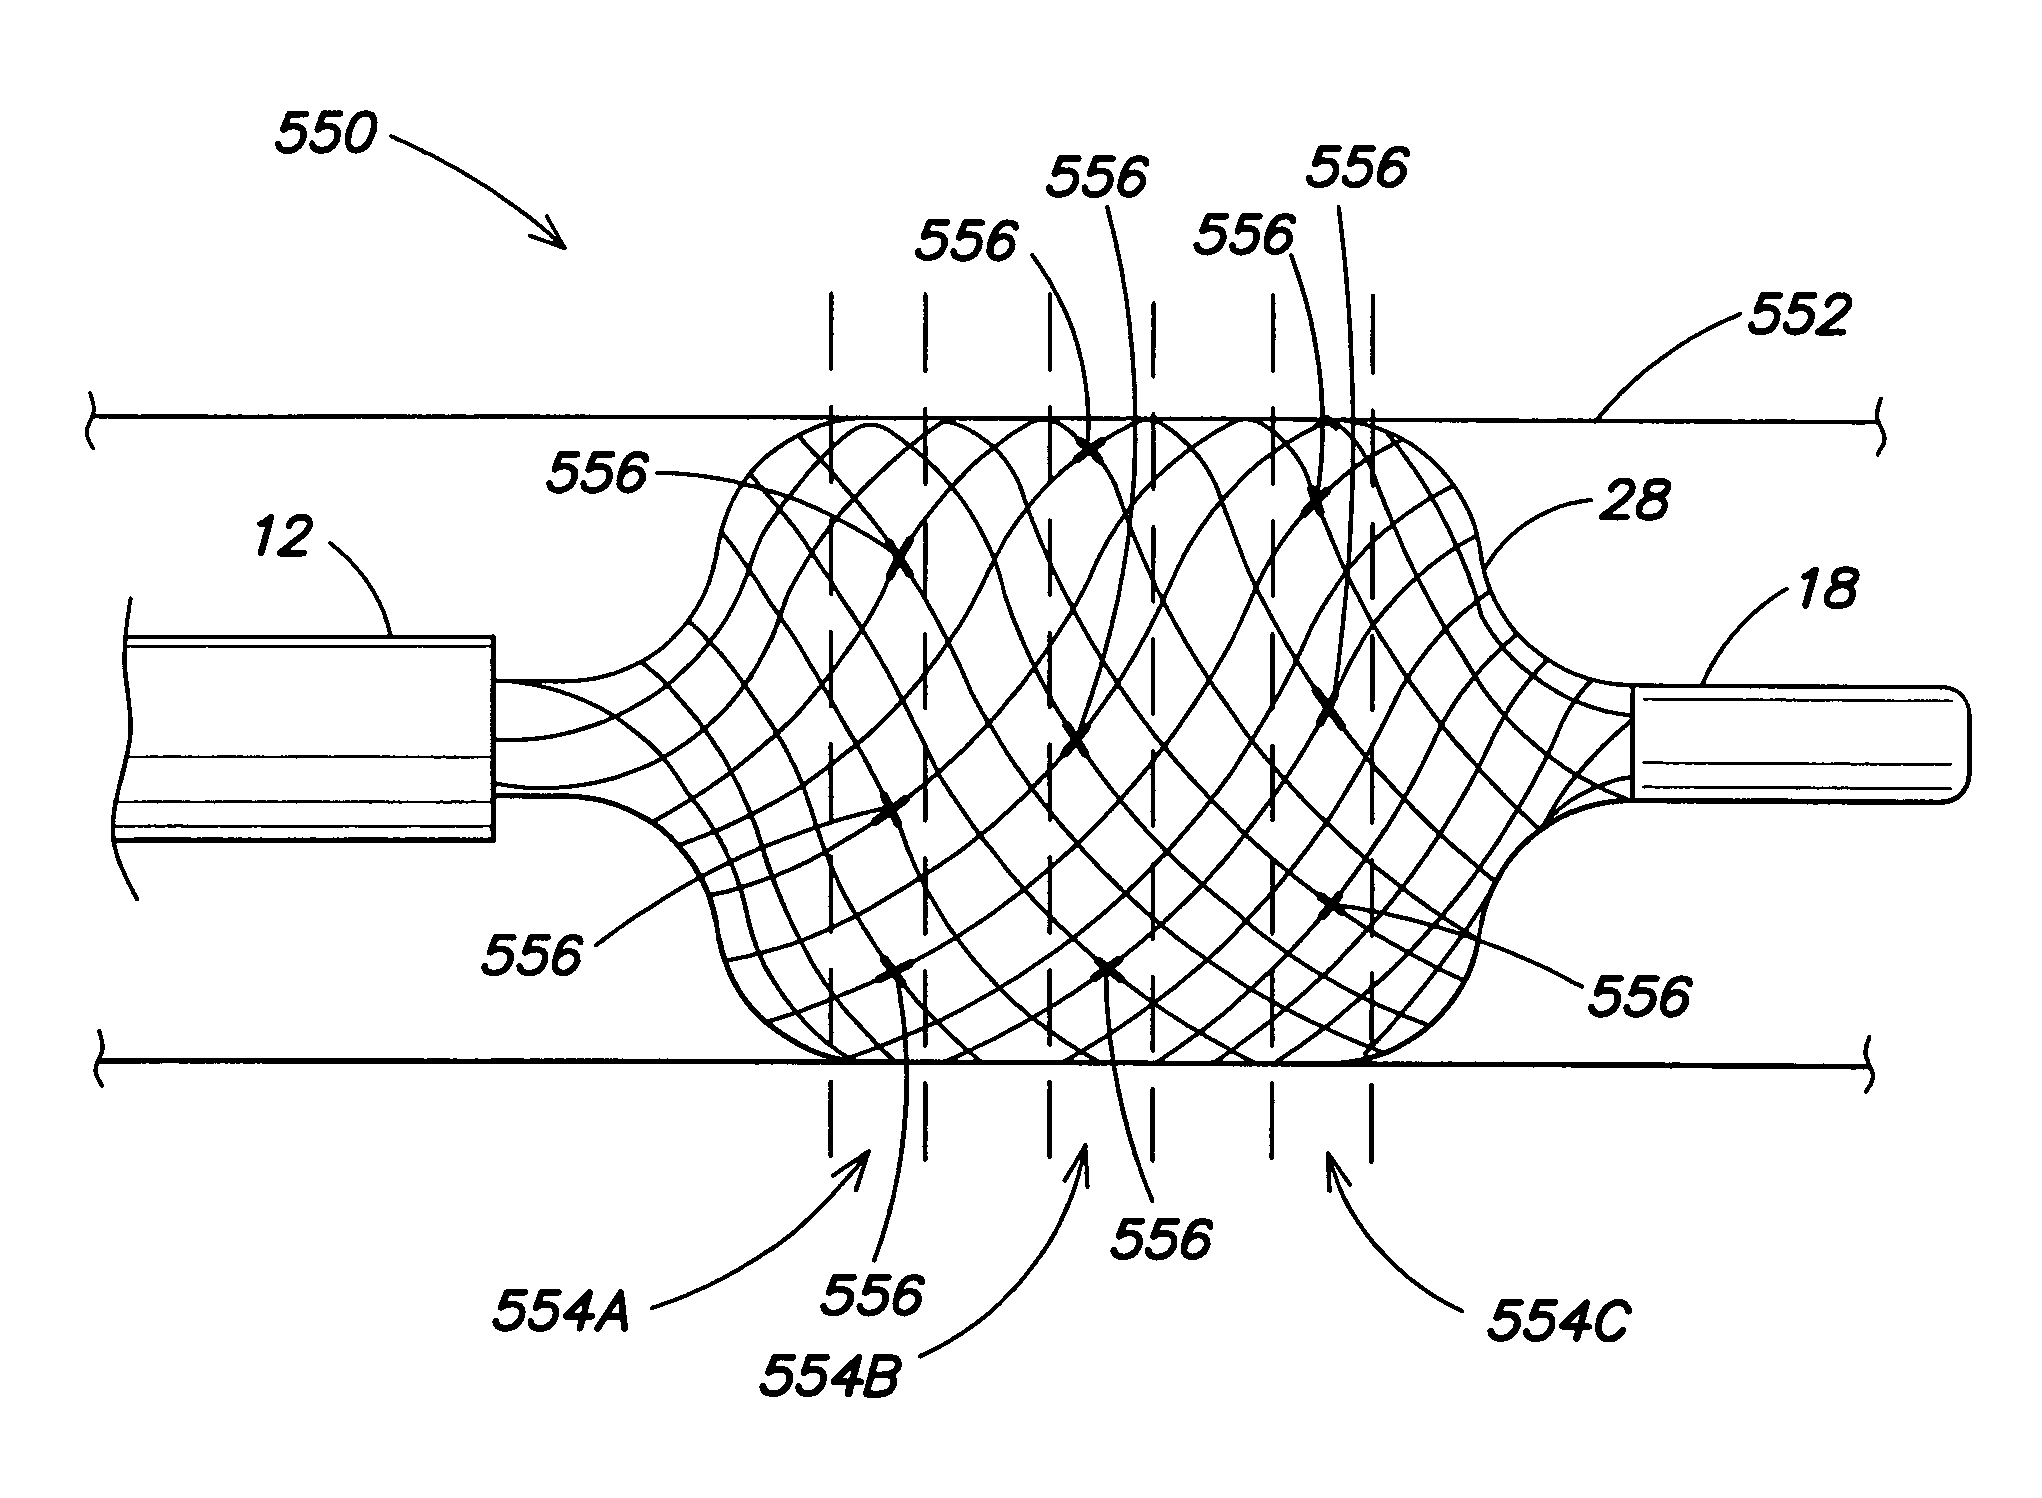 Systems and methods for three-dimensional mapping of electrical activity